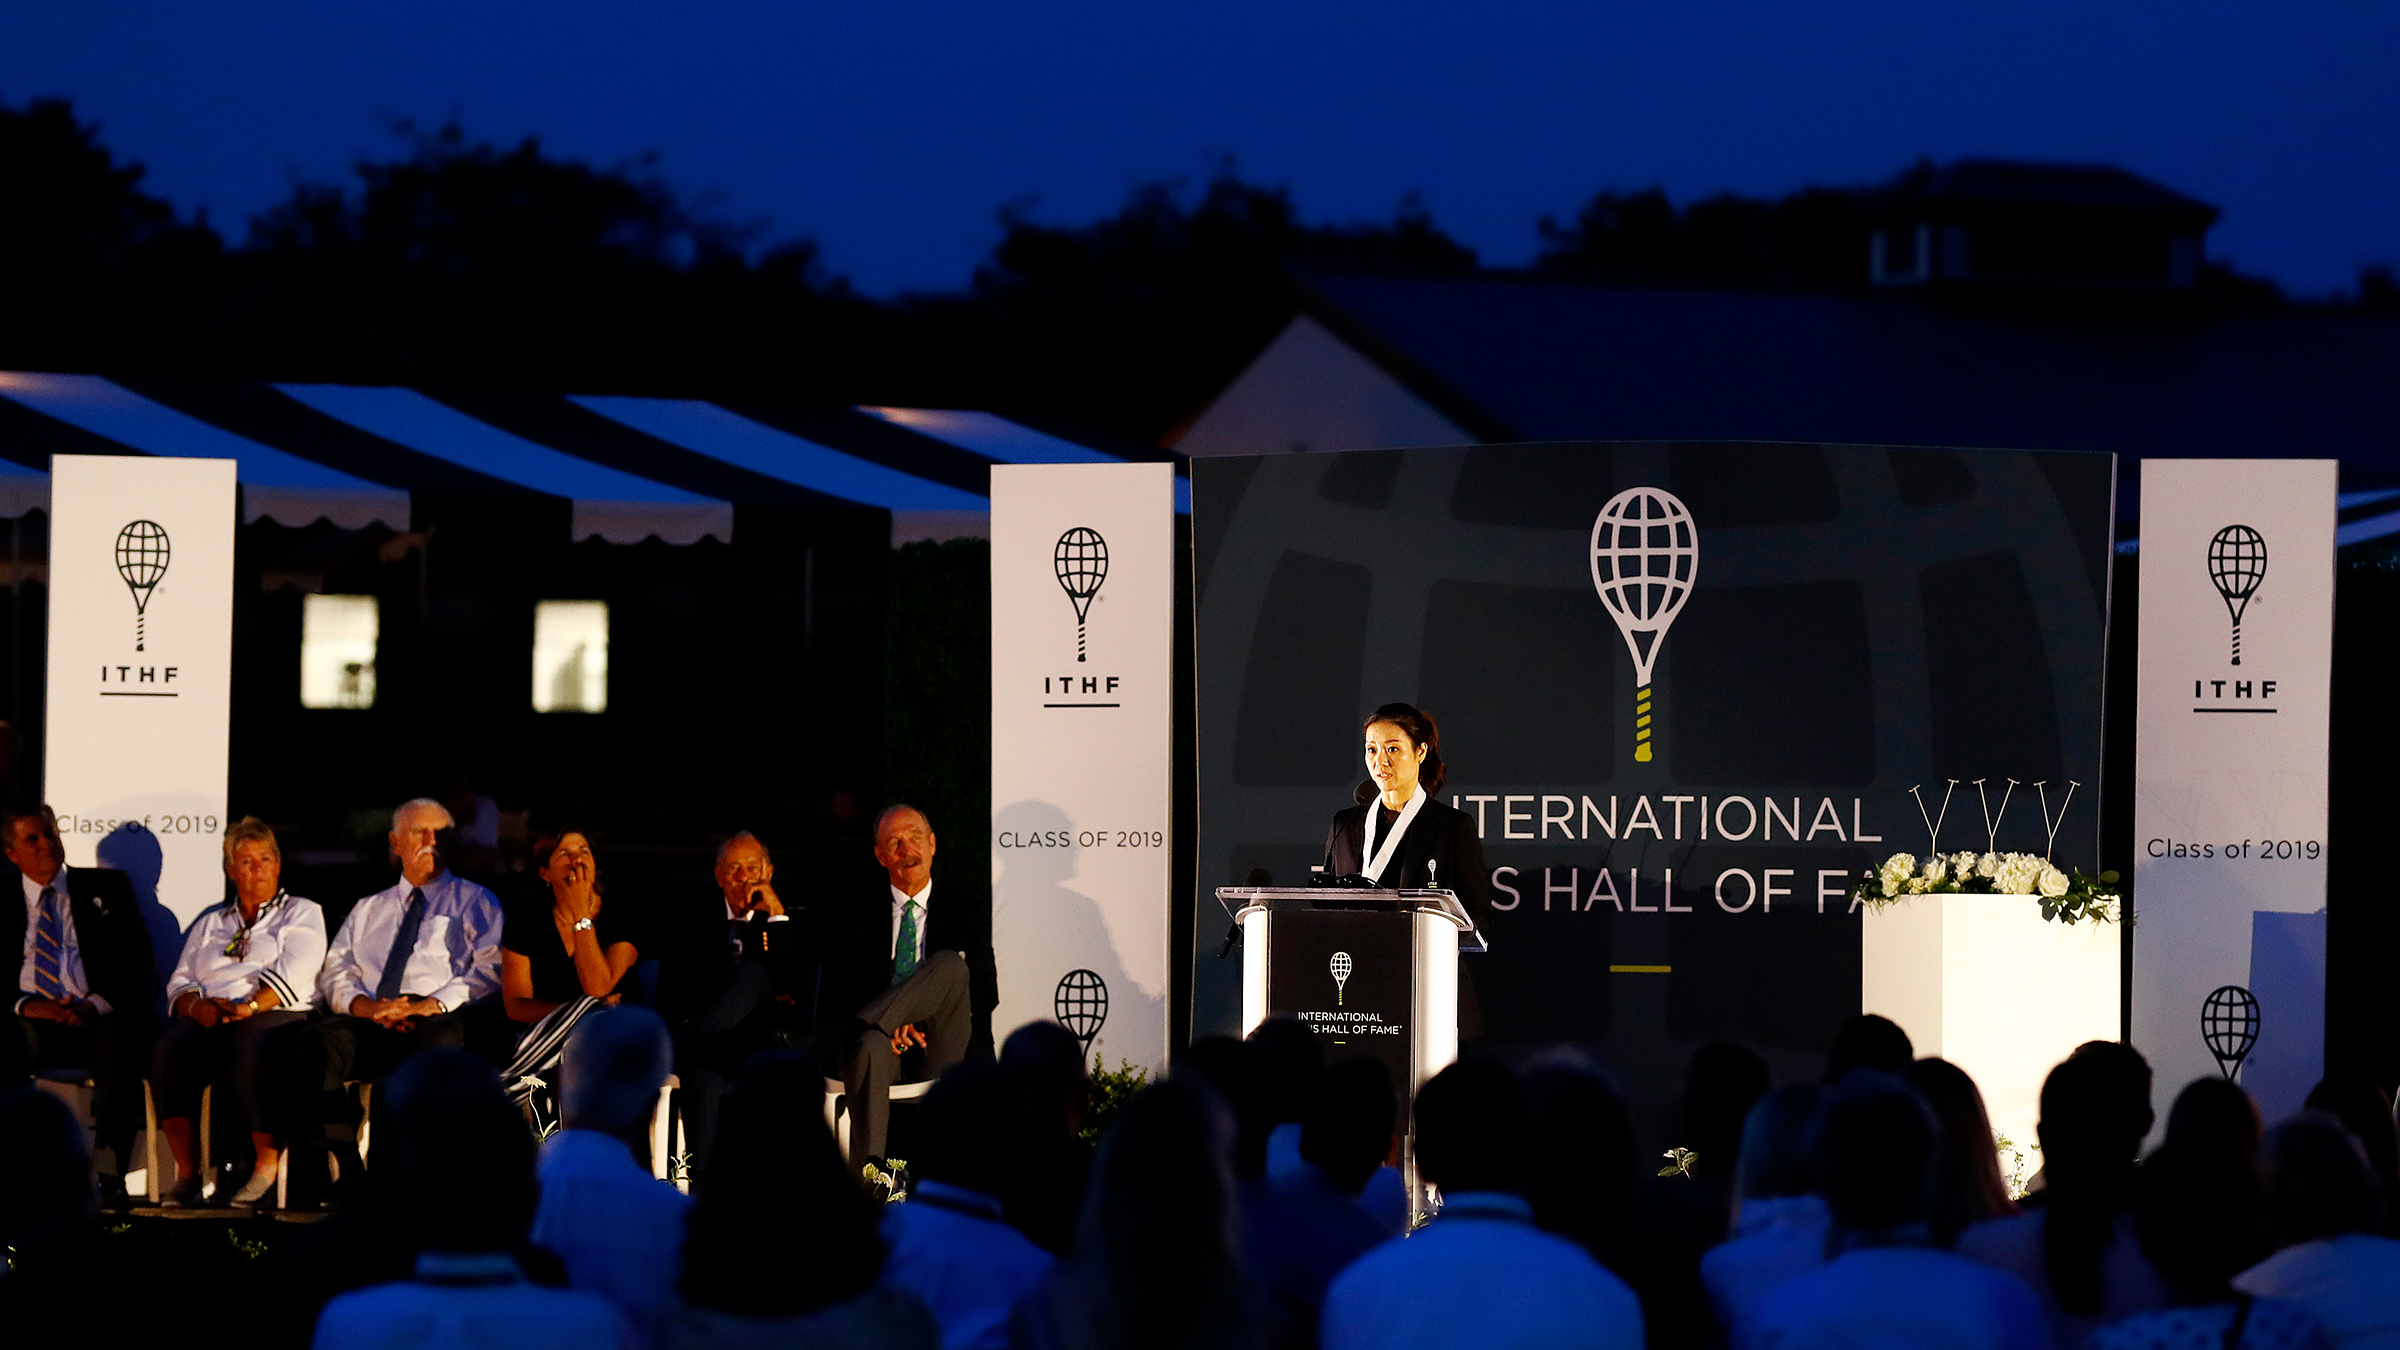 Li Na gives her speech after being inducted into the International Tennis Hall of Fame in Newport, Rhode Island on July 20, 2019.